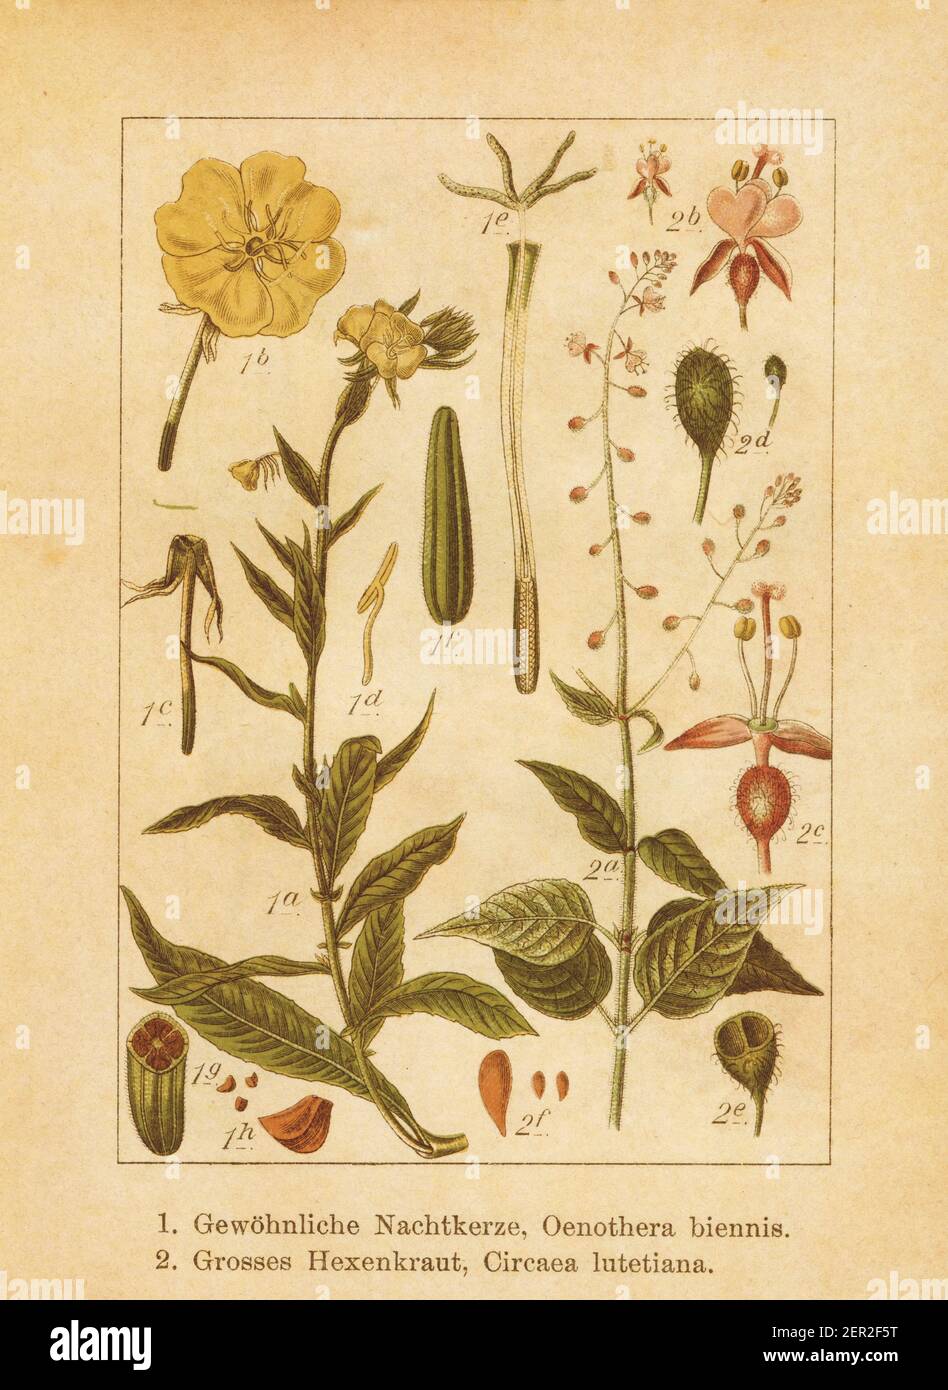 Antique illustration of an oenothera biennis (also known as common evening primrose or evening star) and circaea lutetiana (also known as enchanter's Stock Photo